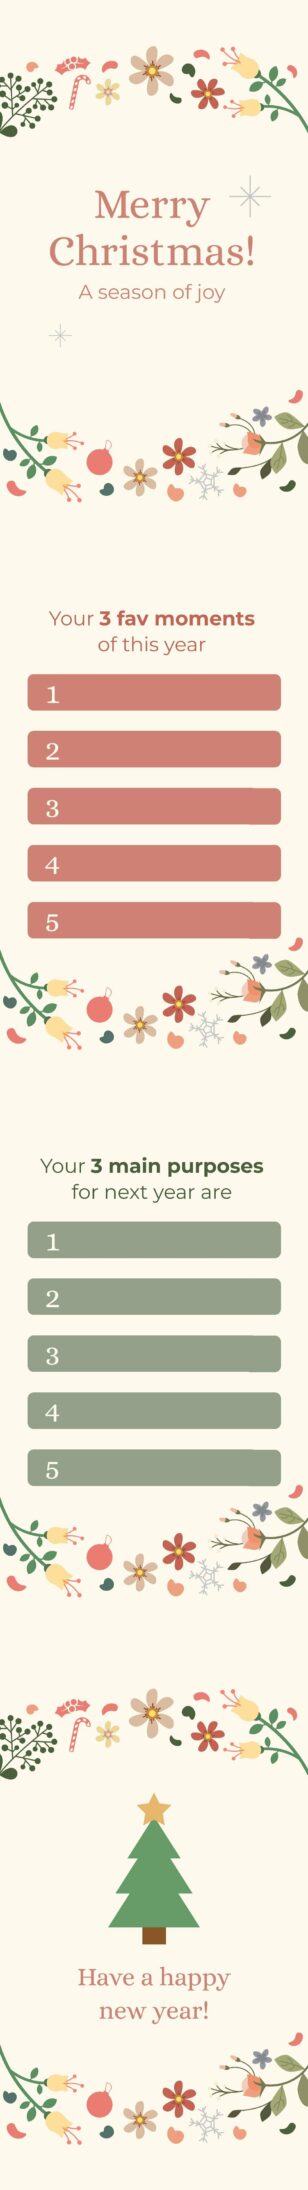 Flowery Christmas Challenge Instagram Story Template